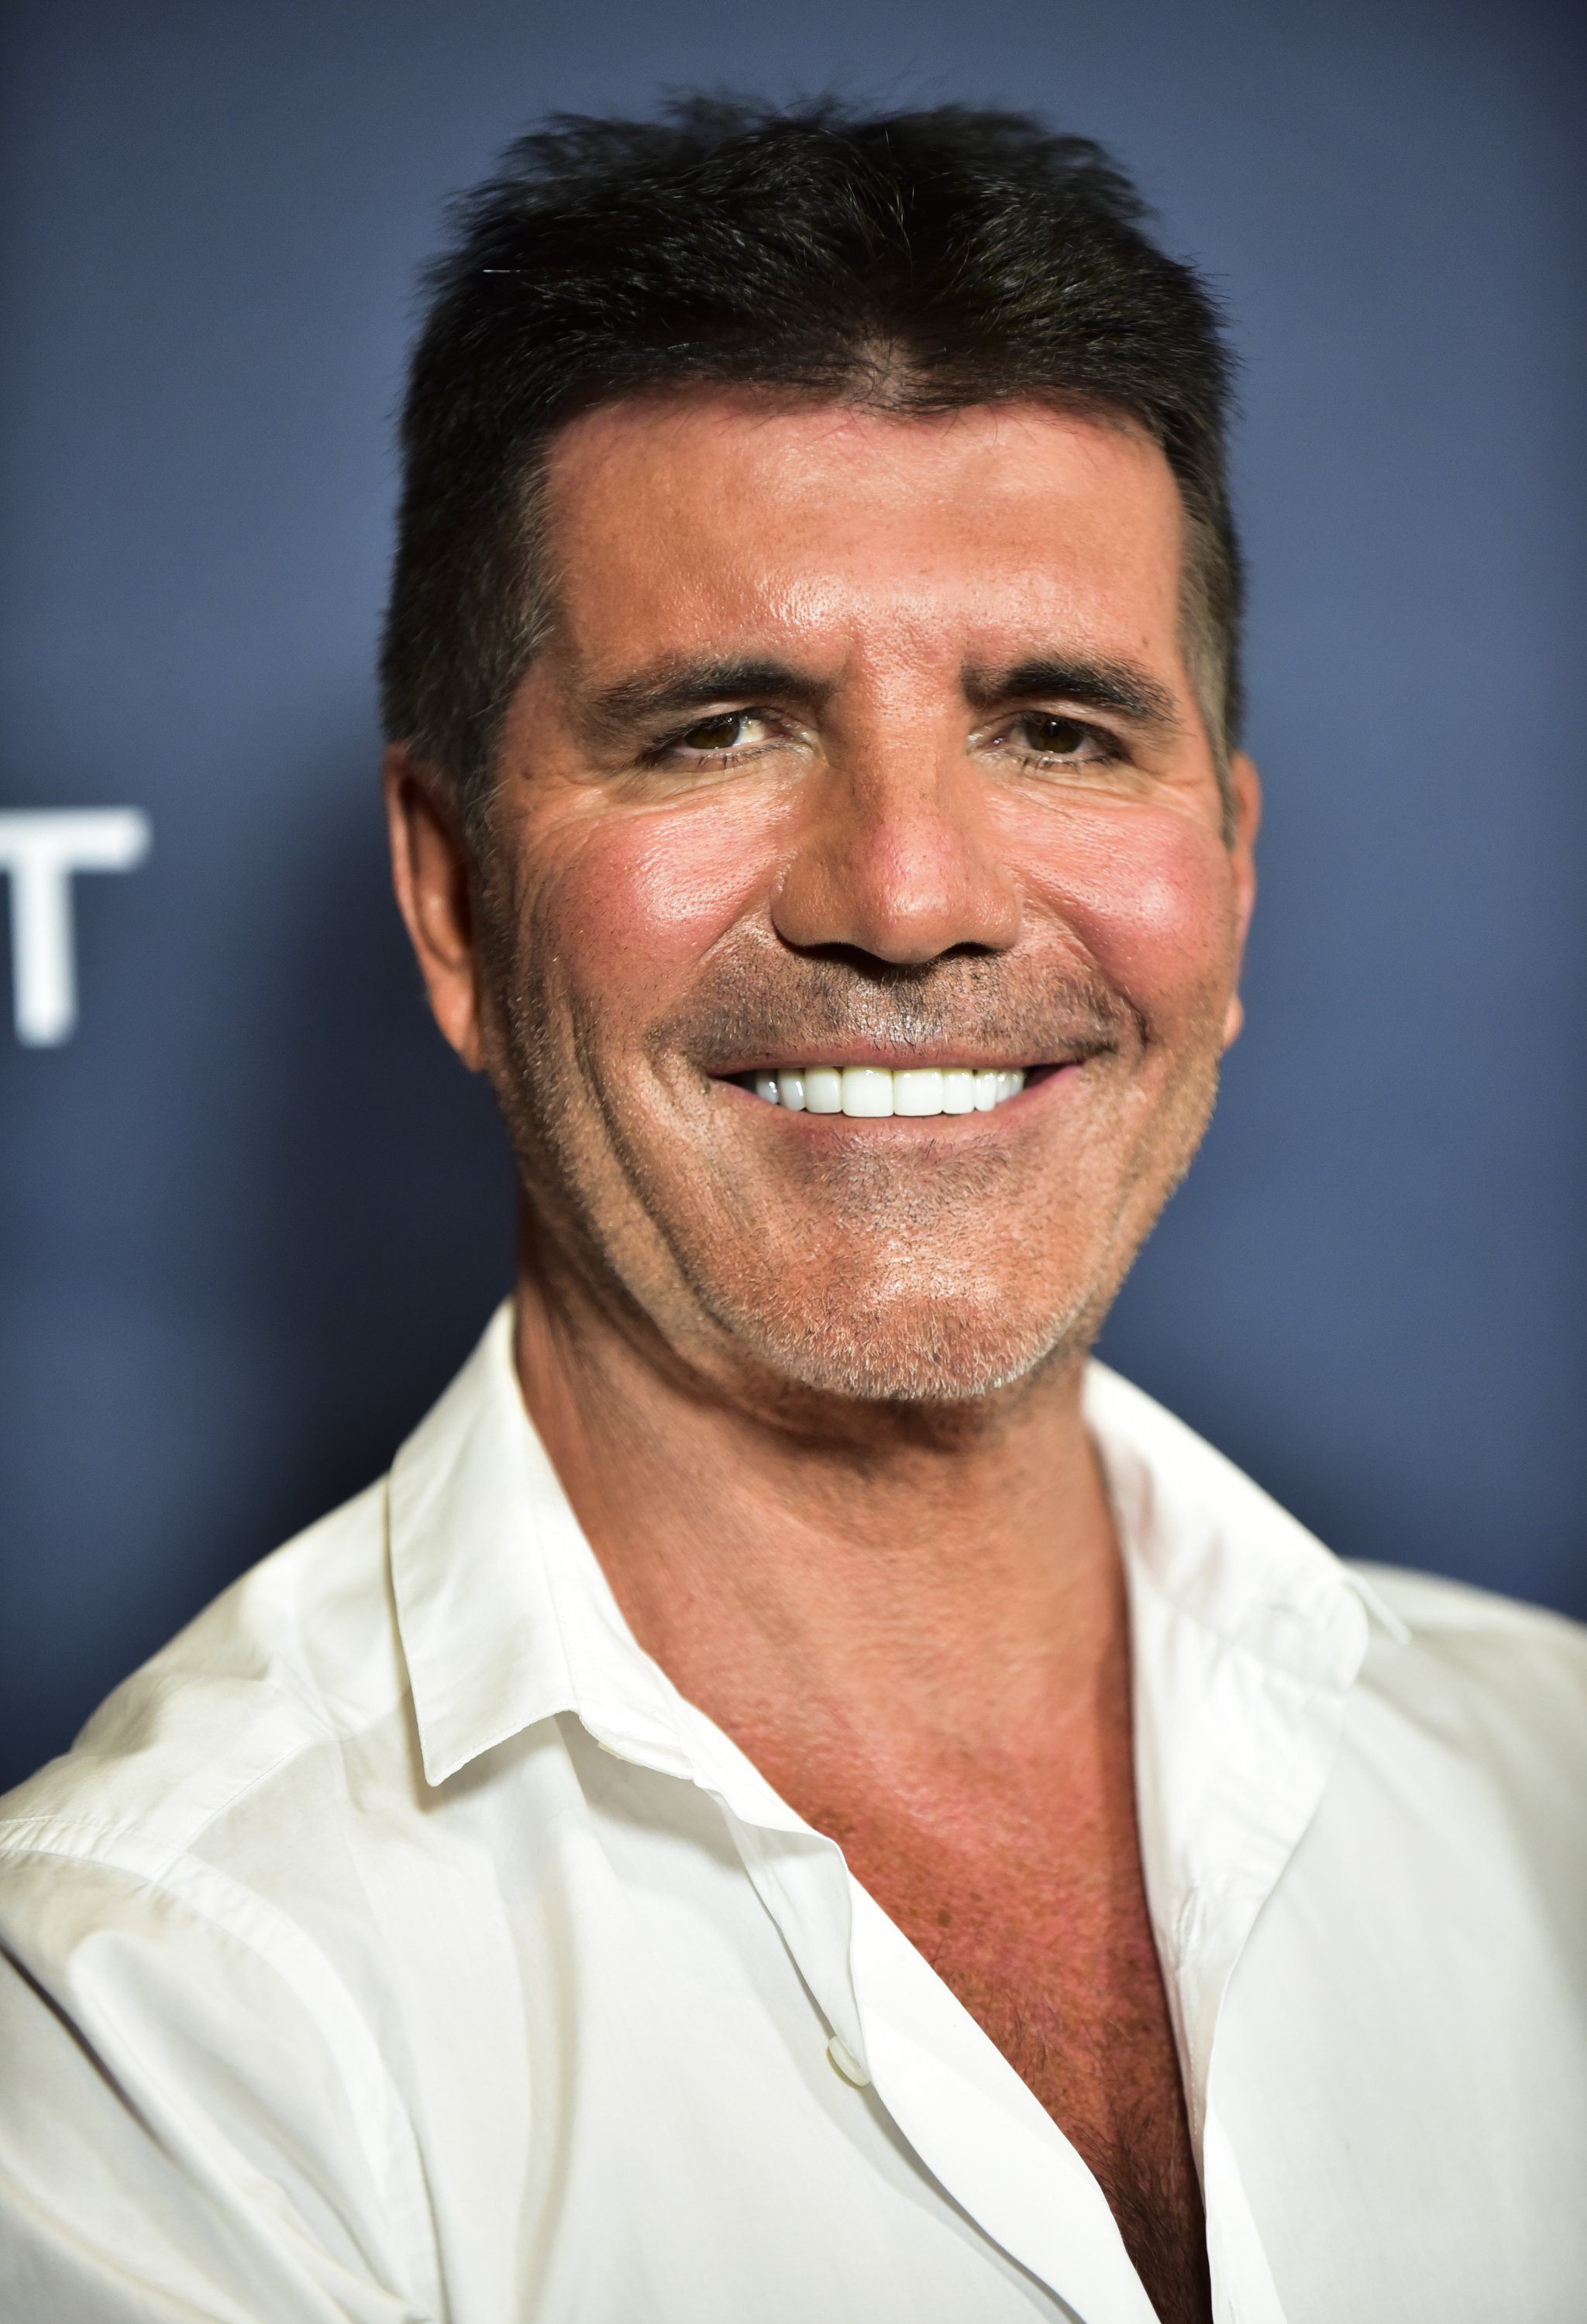 Simon Cowell at the "America's Got Talent" Season 14 Finale red carpet at Dolby Theatre on September 18, 2019, in Hollywood, California | Source: Getty Images